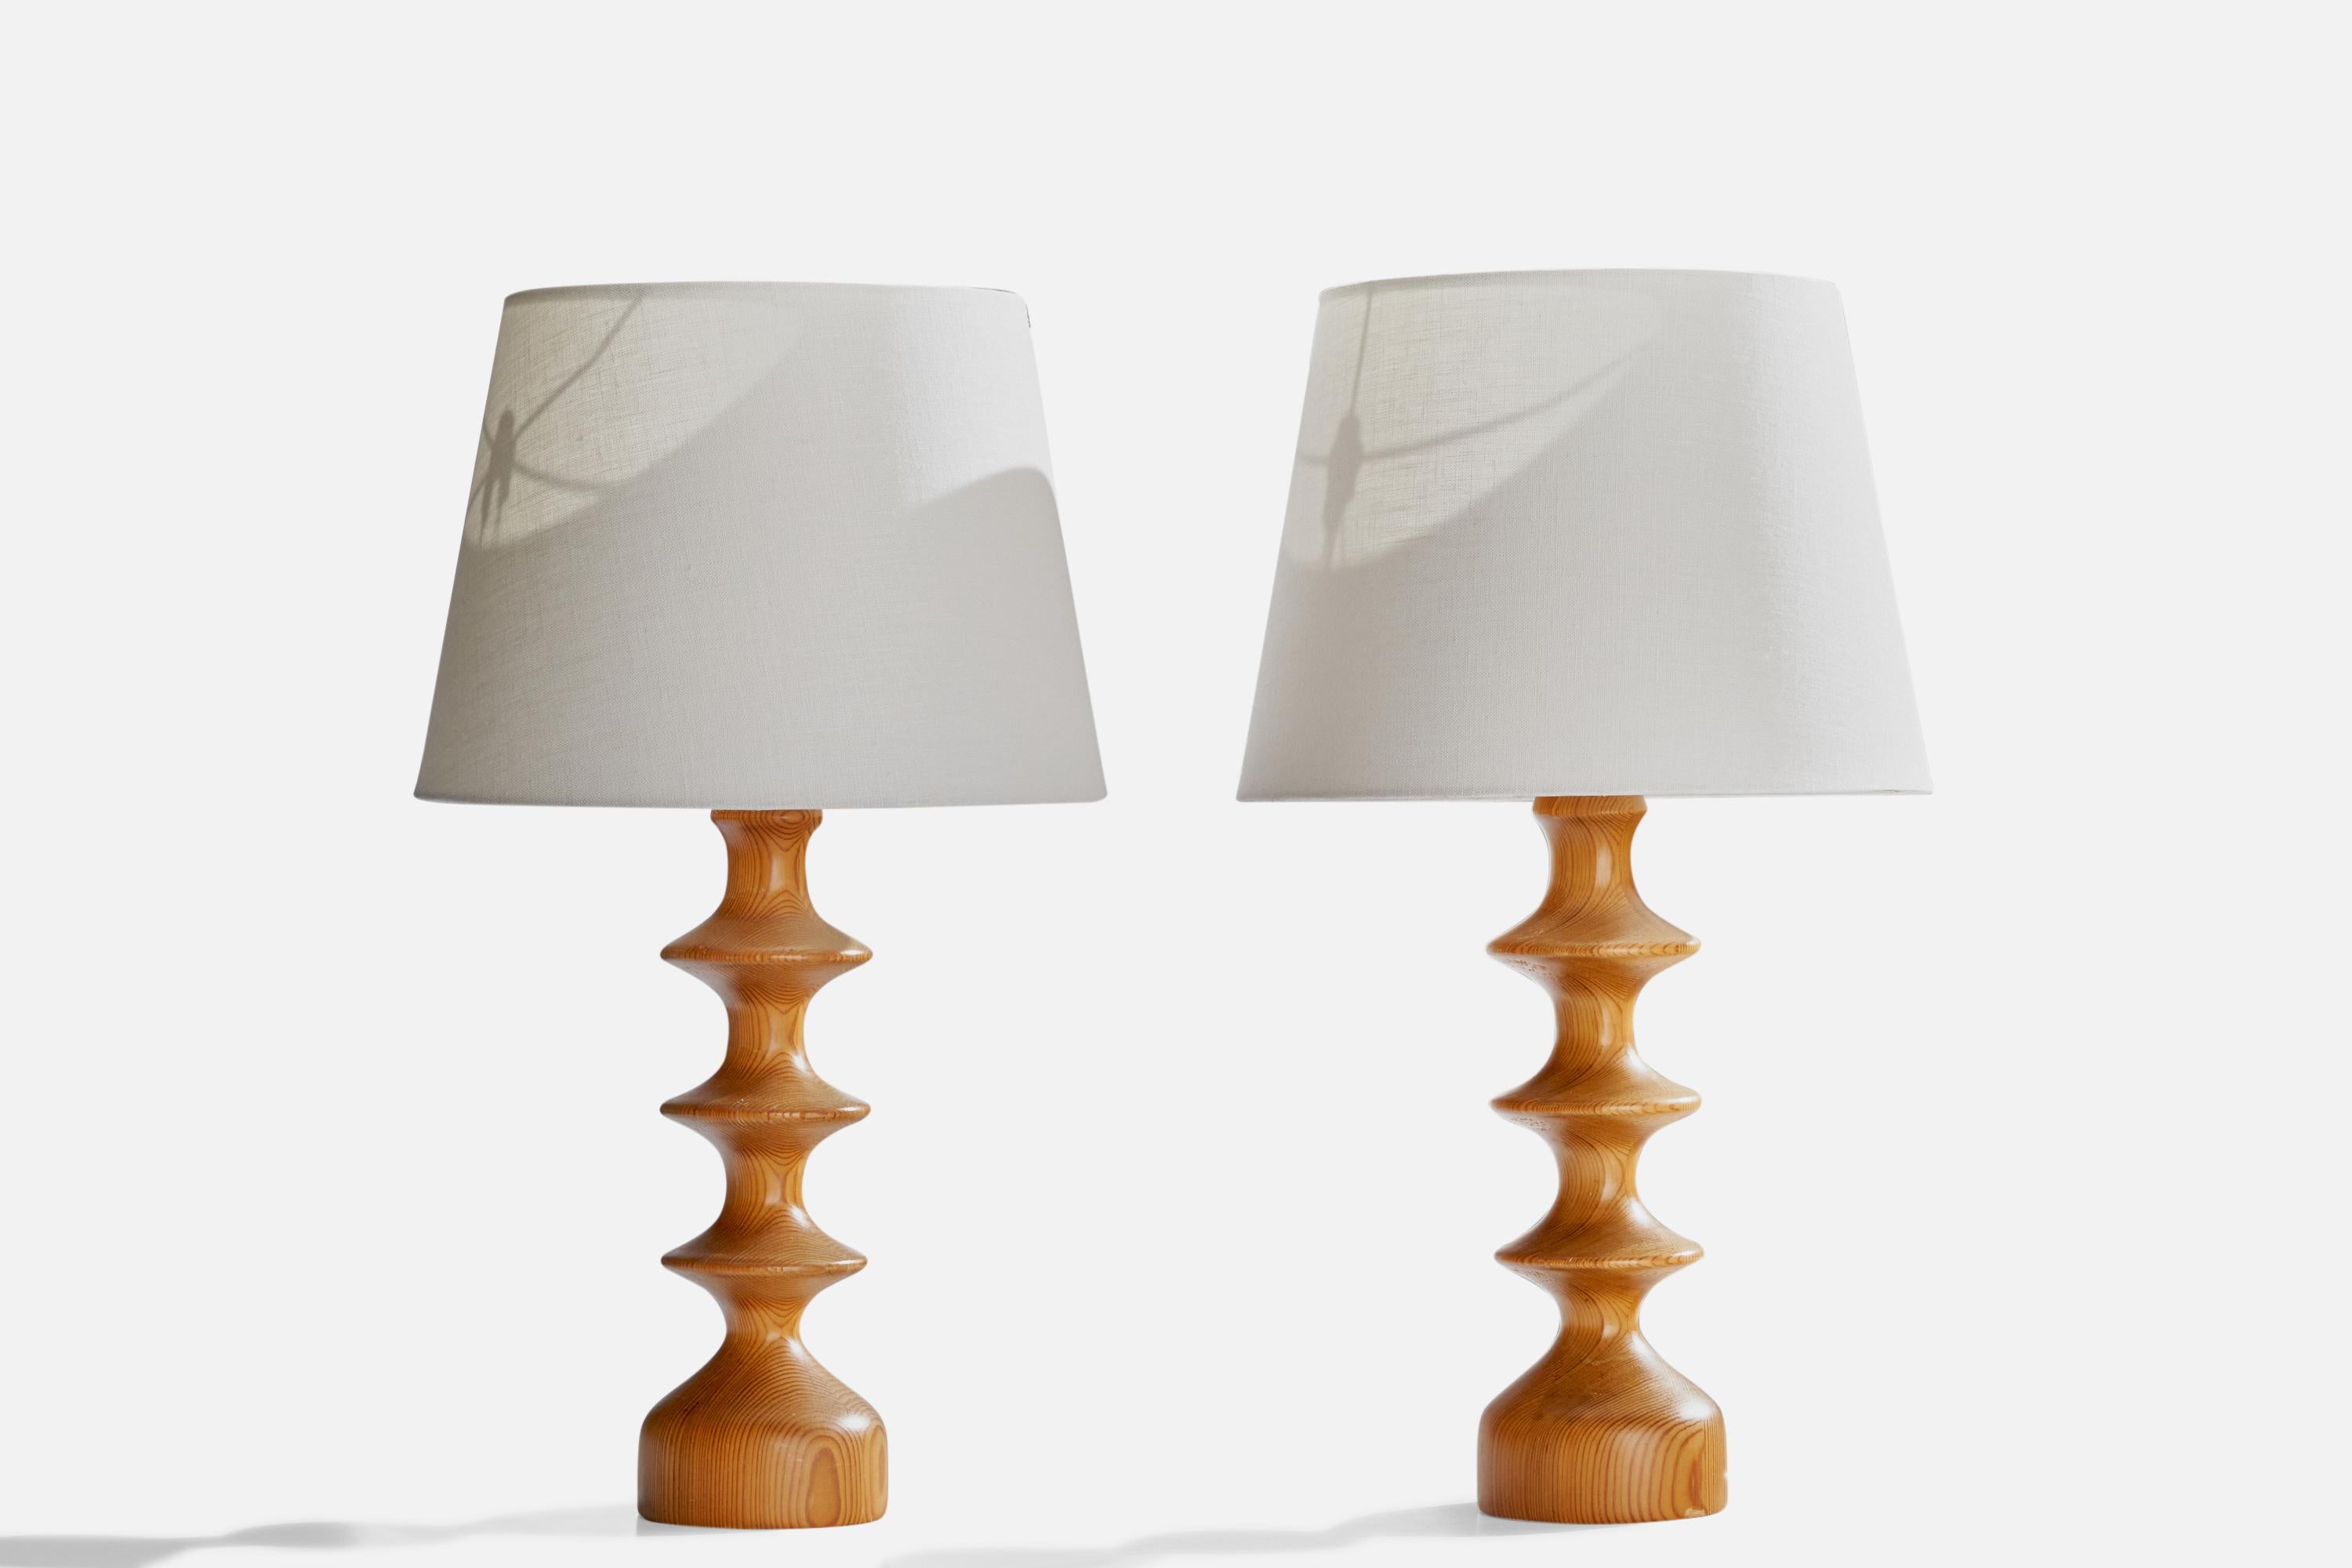 A pair of pine table lamps designed and produced in Sweden, c. 1970s.

Dimensions of Lamp (inches): 16”  H x 4.5” Diameter
Dimensions of Shade (inches): 9”  Top Diameter x 12” Bottom Diameter x 9” H
Dimensions of Lamp with Shade (inches): 21”  H x